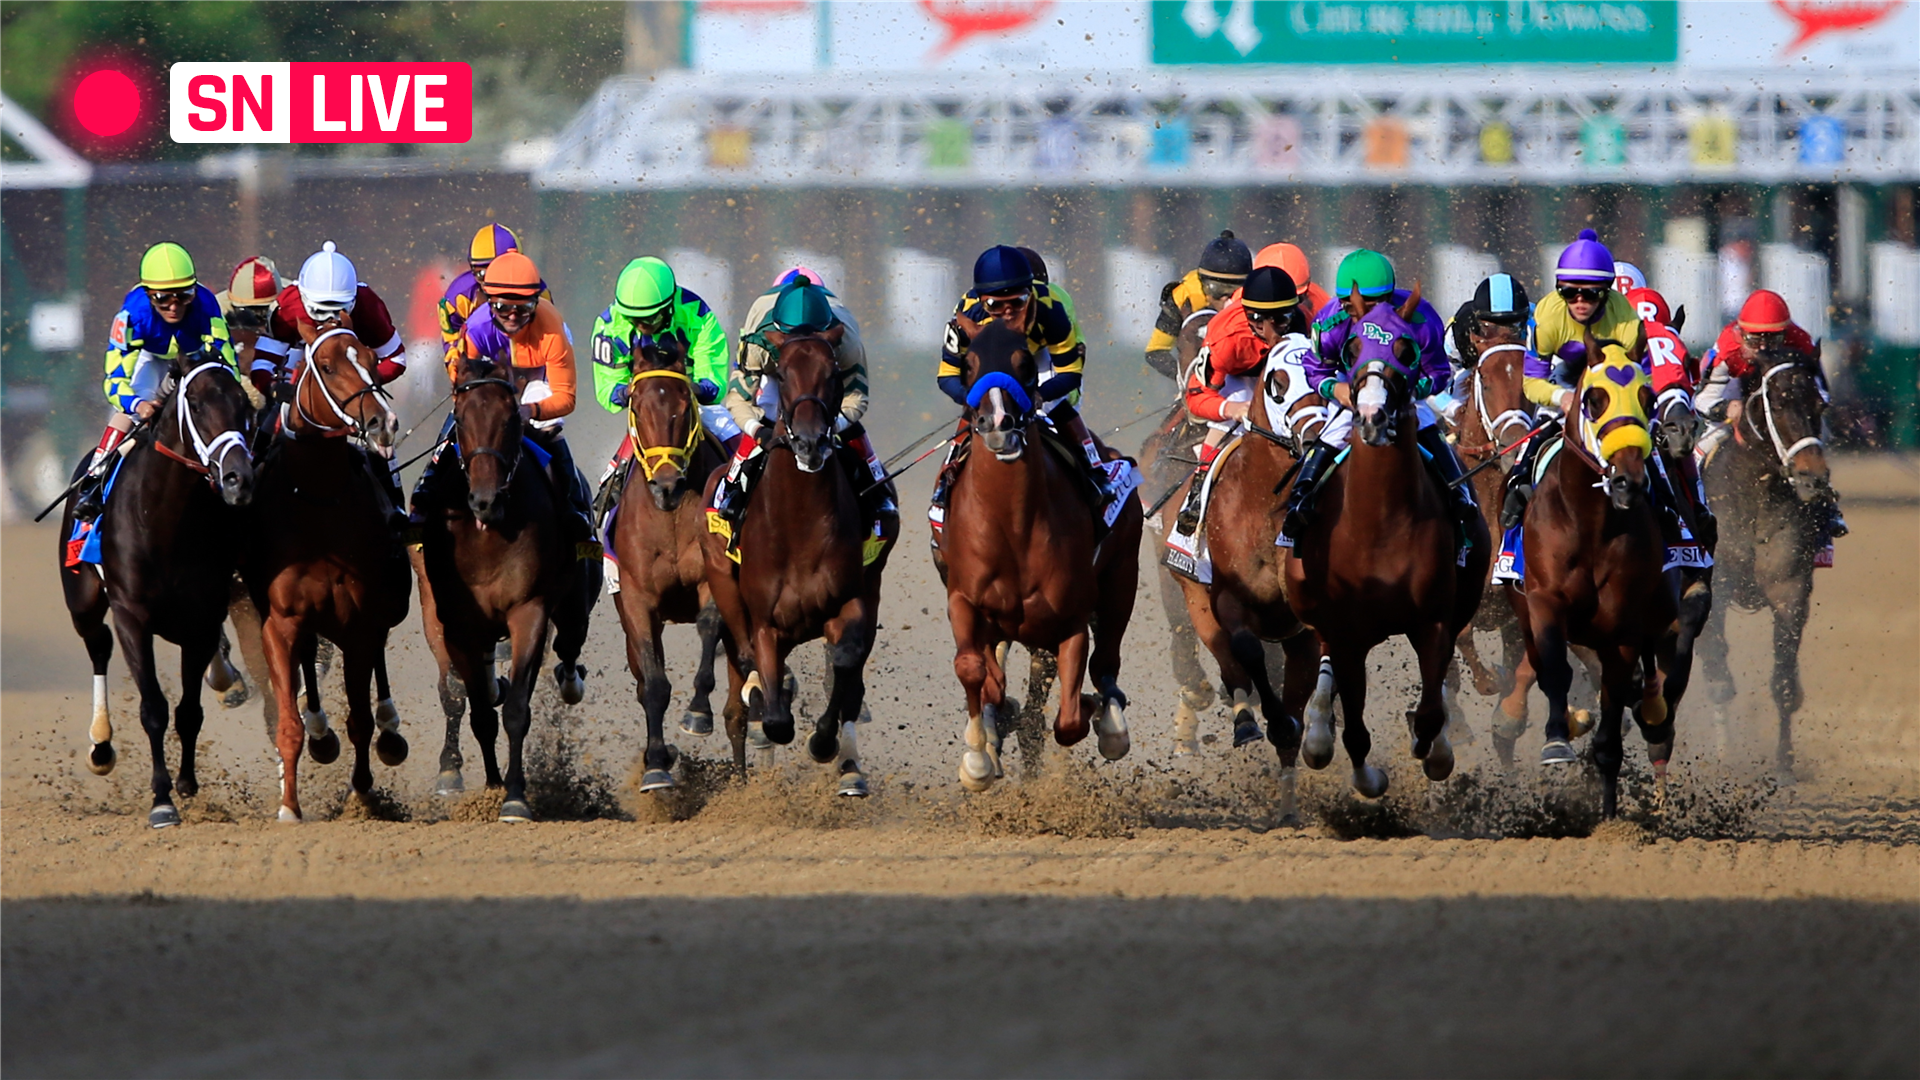 Kentucky Derby 2019: Live race updates, results from Churchill Downs | Sporting News Canada